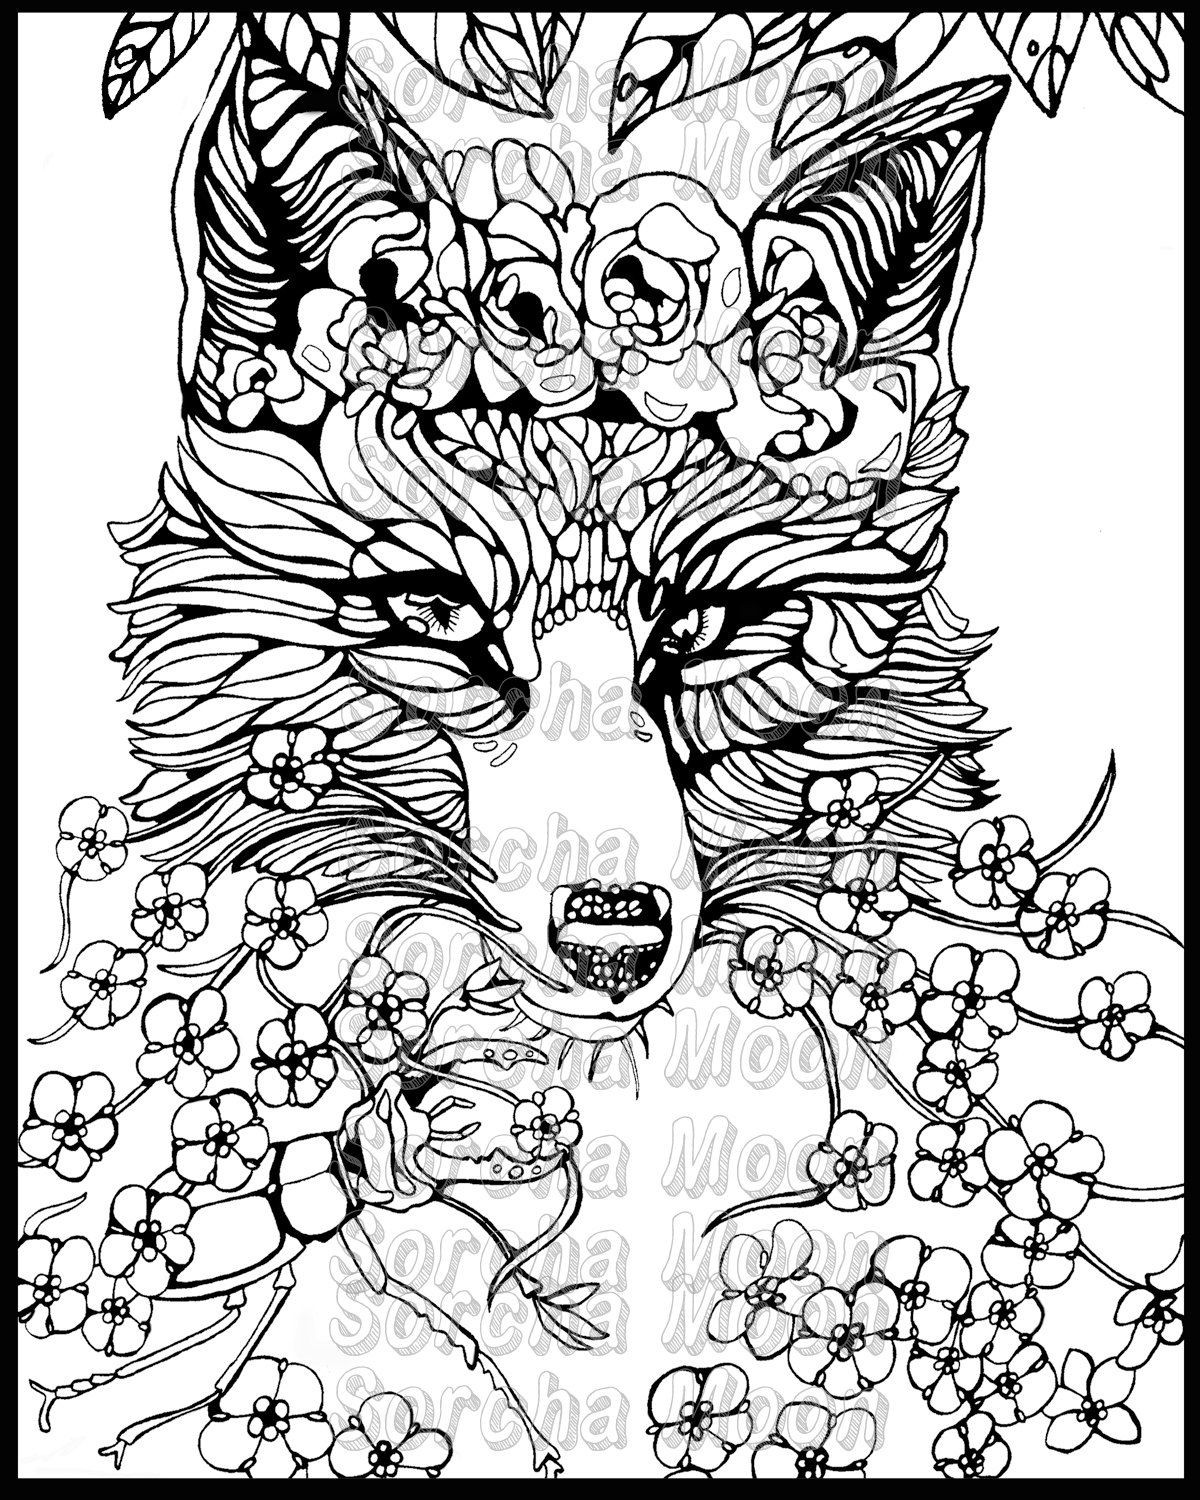 Fox Girl Coloring Pages For Adults
 Fox For Me Nots Coloring Page for Adults by SorchaMoon